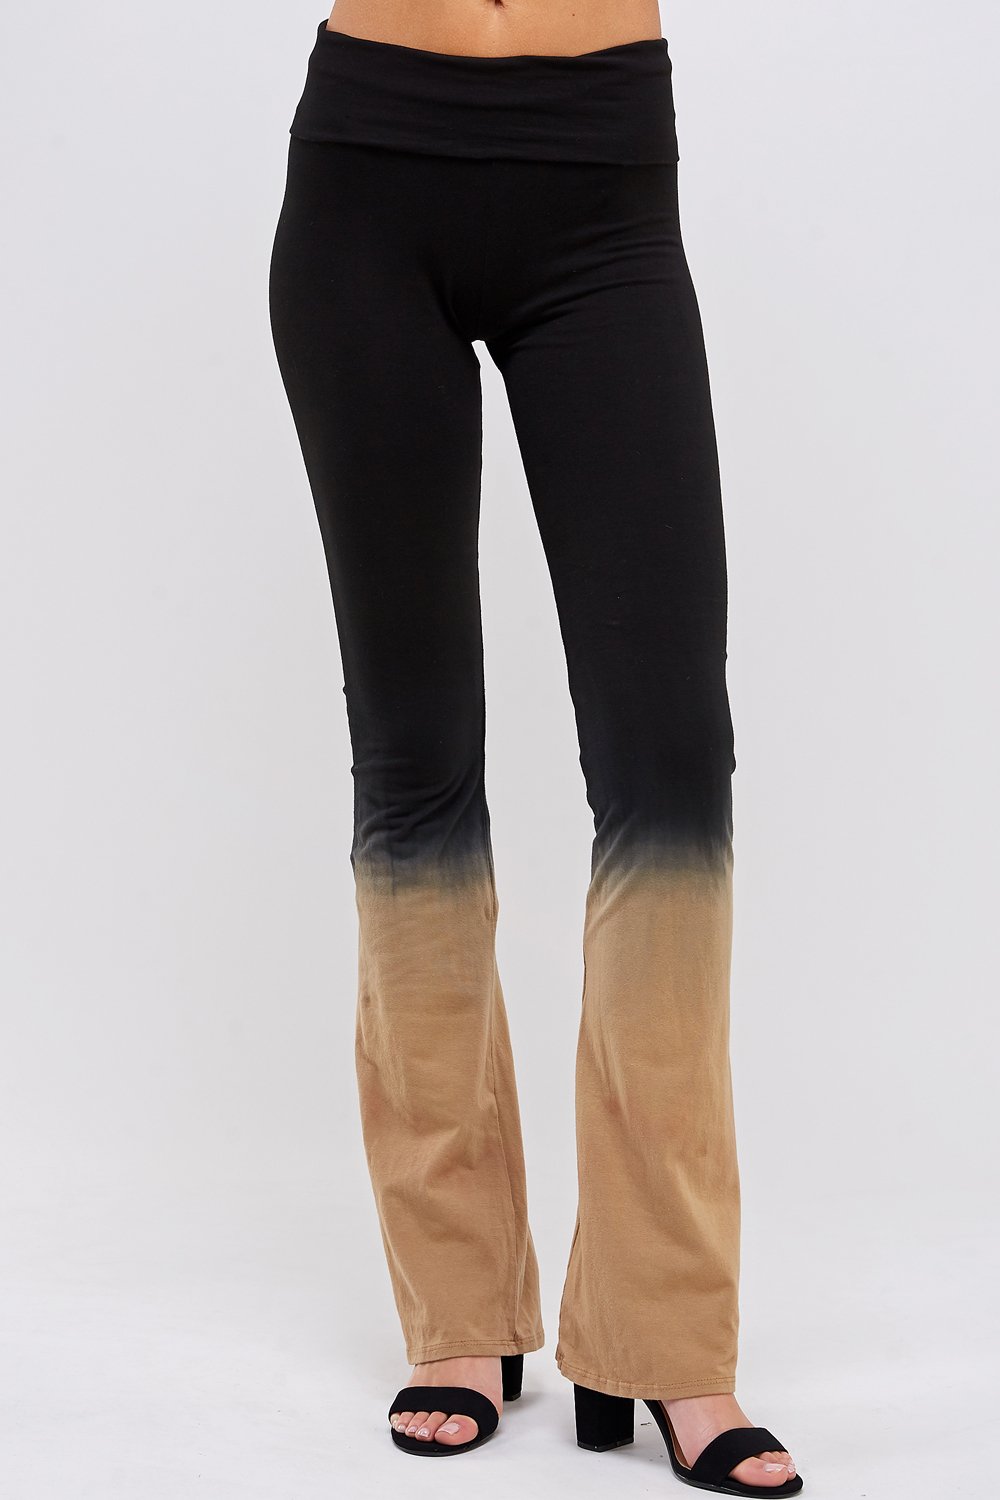 Front side Black and Mocha Dip Ombre tie dye Fold Over Yoga Pant